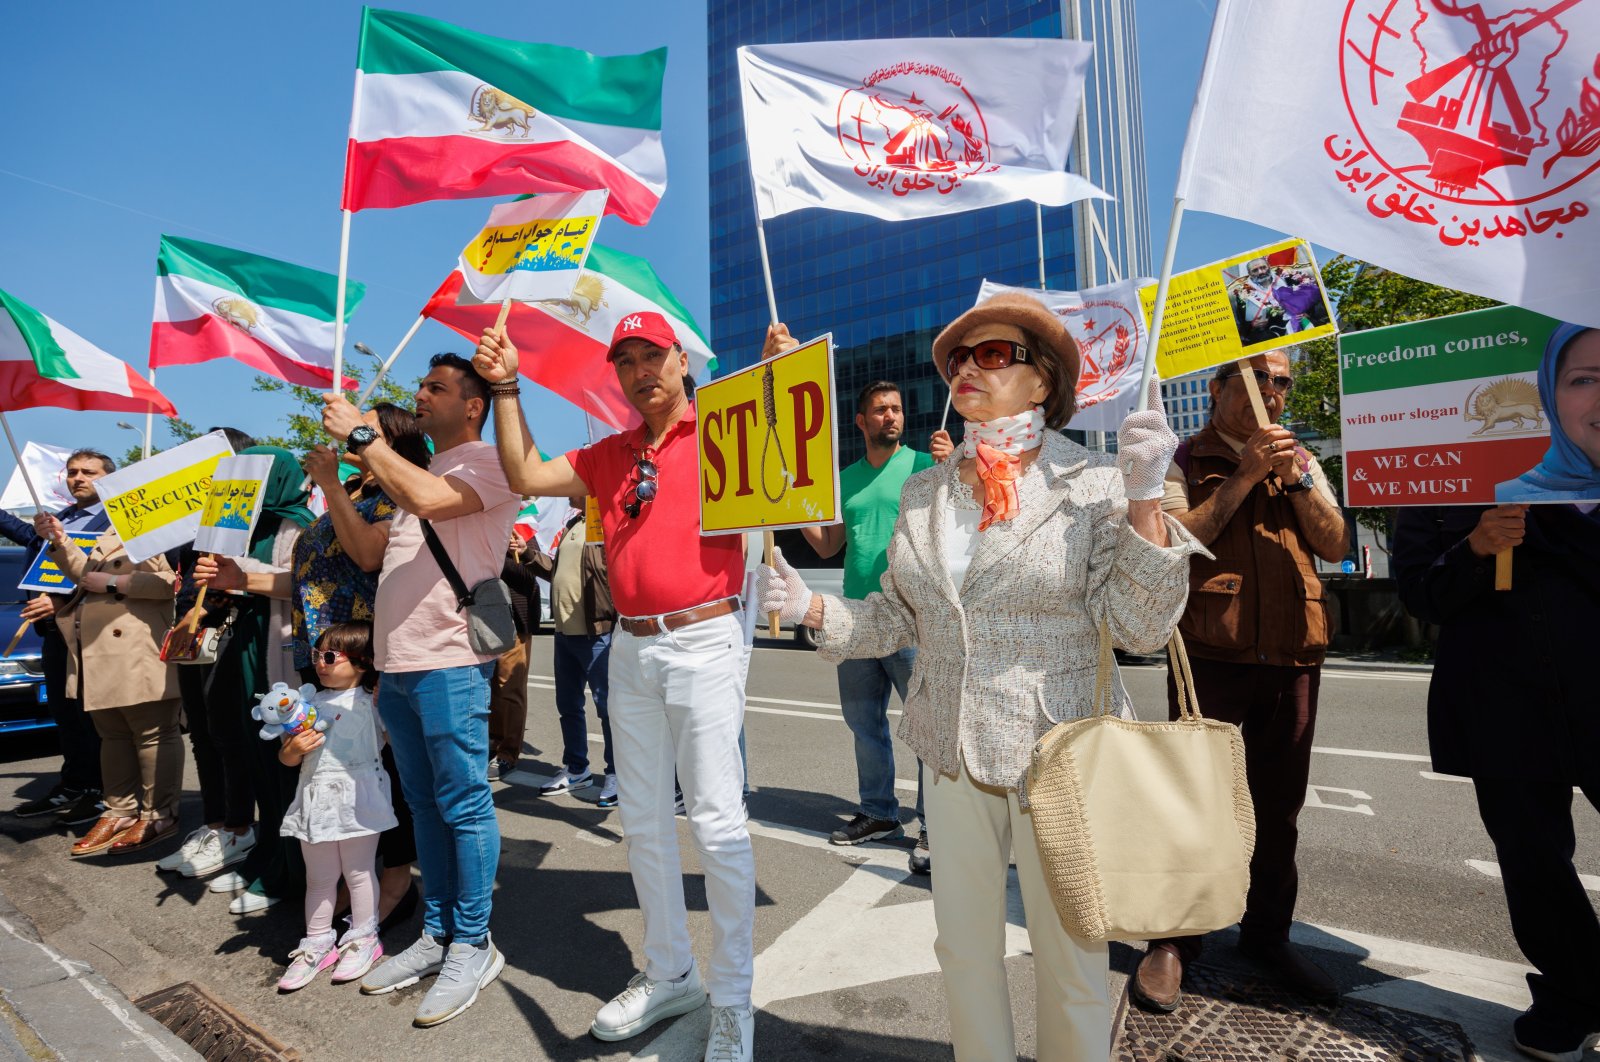 Iranian refugees rally against executions in Iran, in front of the building of the Commissariat for Refugees, Brussels, Belgium, June 1, 2023. (EPA Photo)